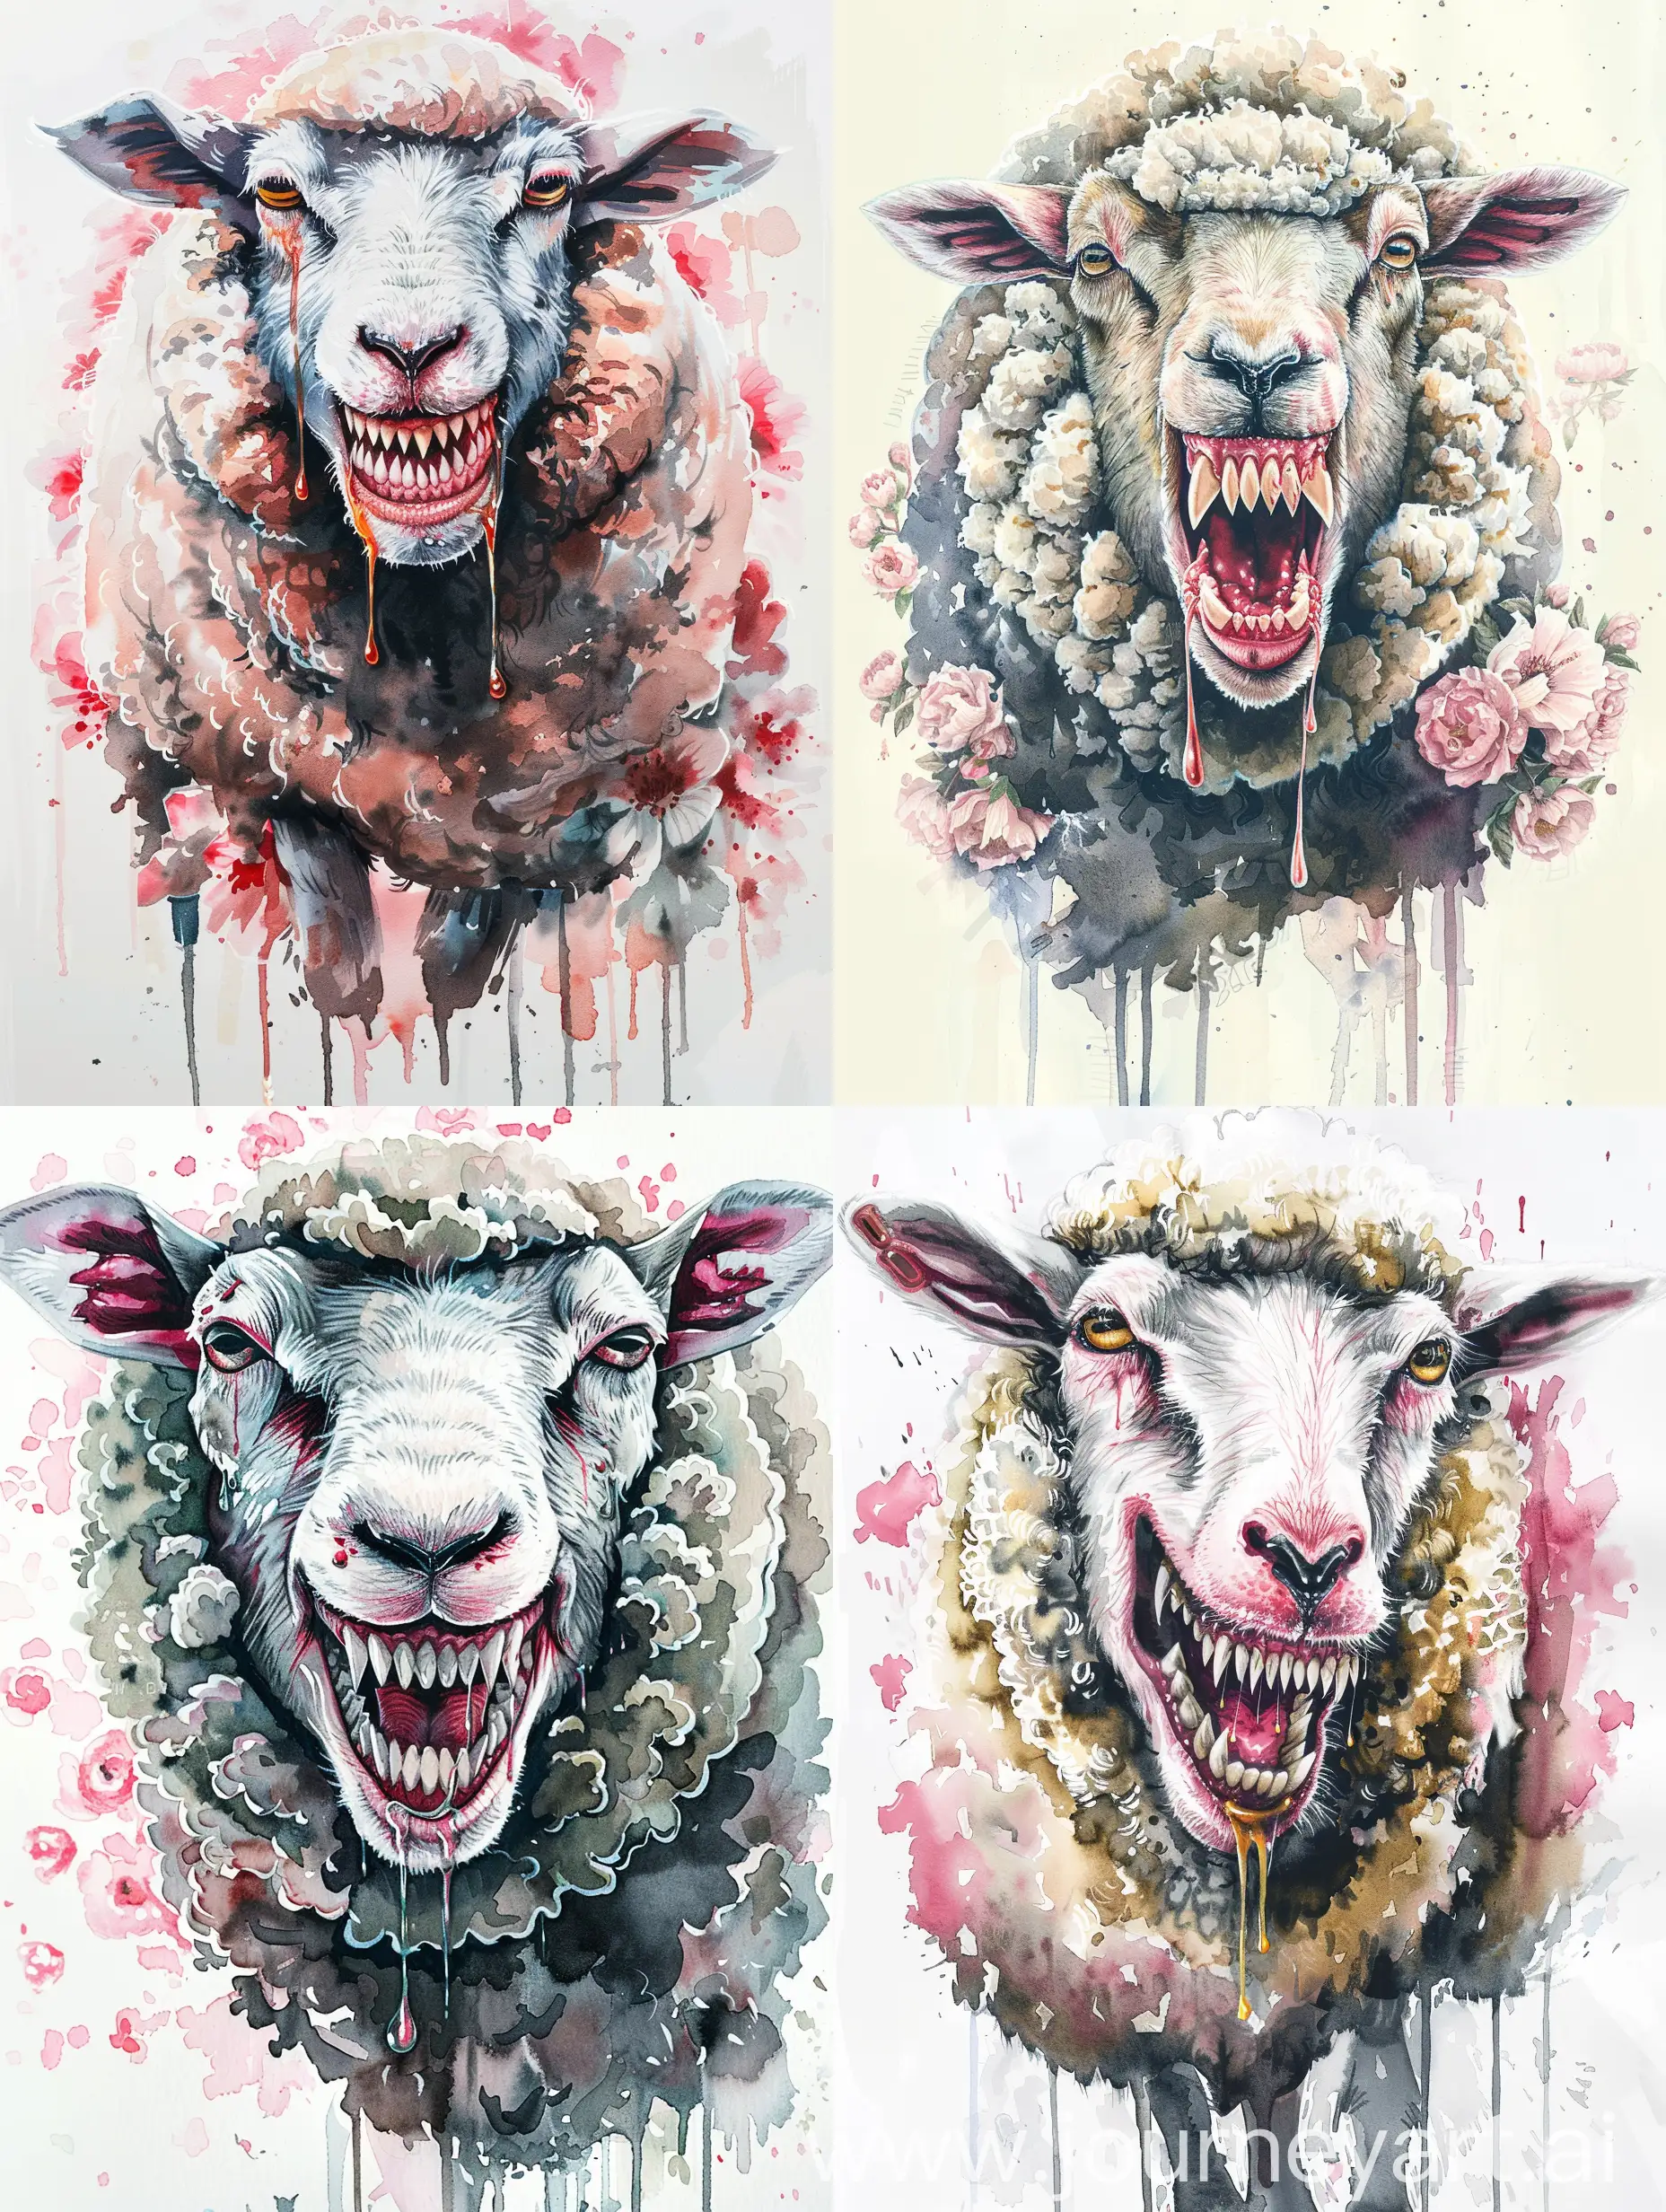 illustration of honey care pump watercolor painting, detailed portrait of a sheep with a wolfish grin, emphasis on fangs with dripping saliva, uhd image, animal images, dreamy watercolor flowers, childlike innocence, bo Chen, dark white and pink